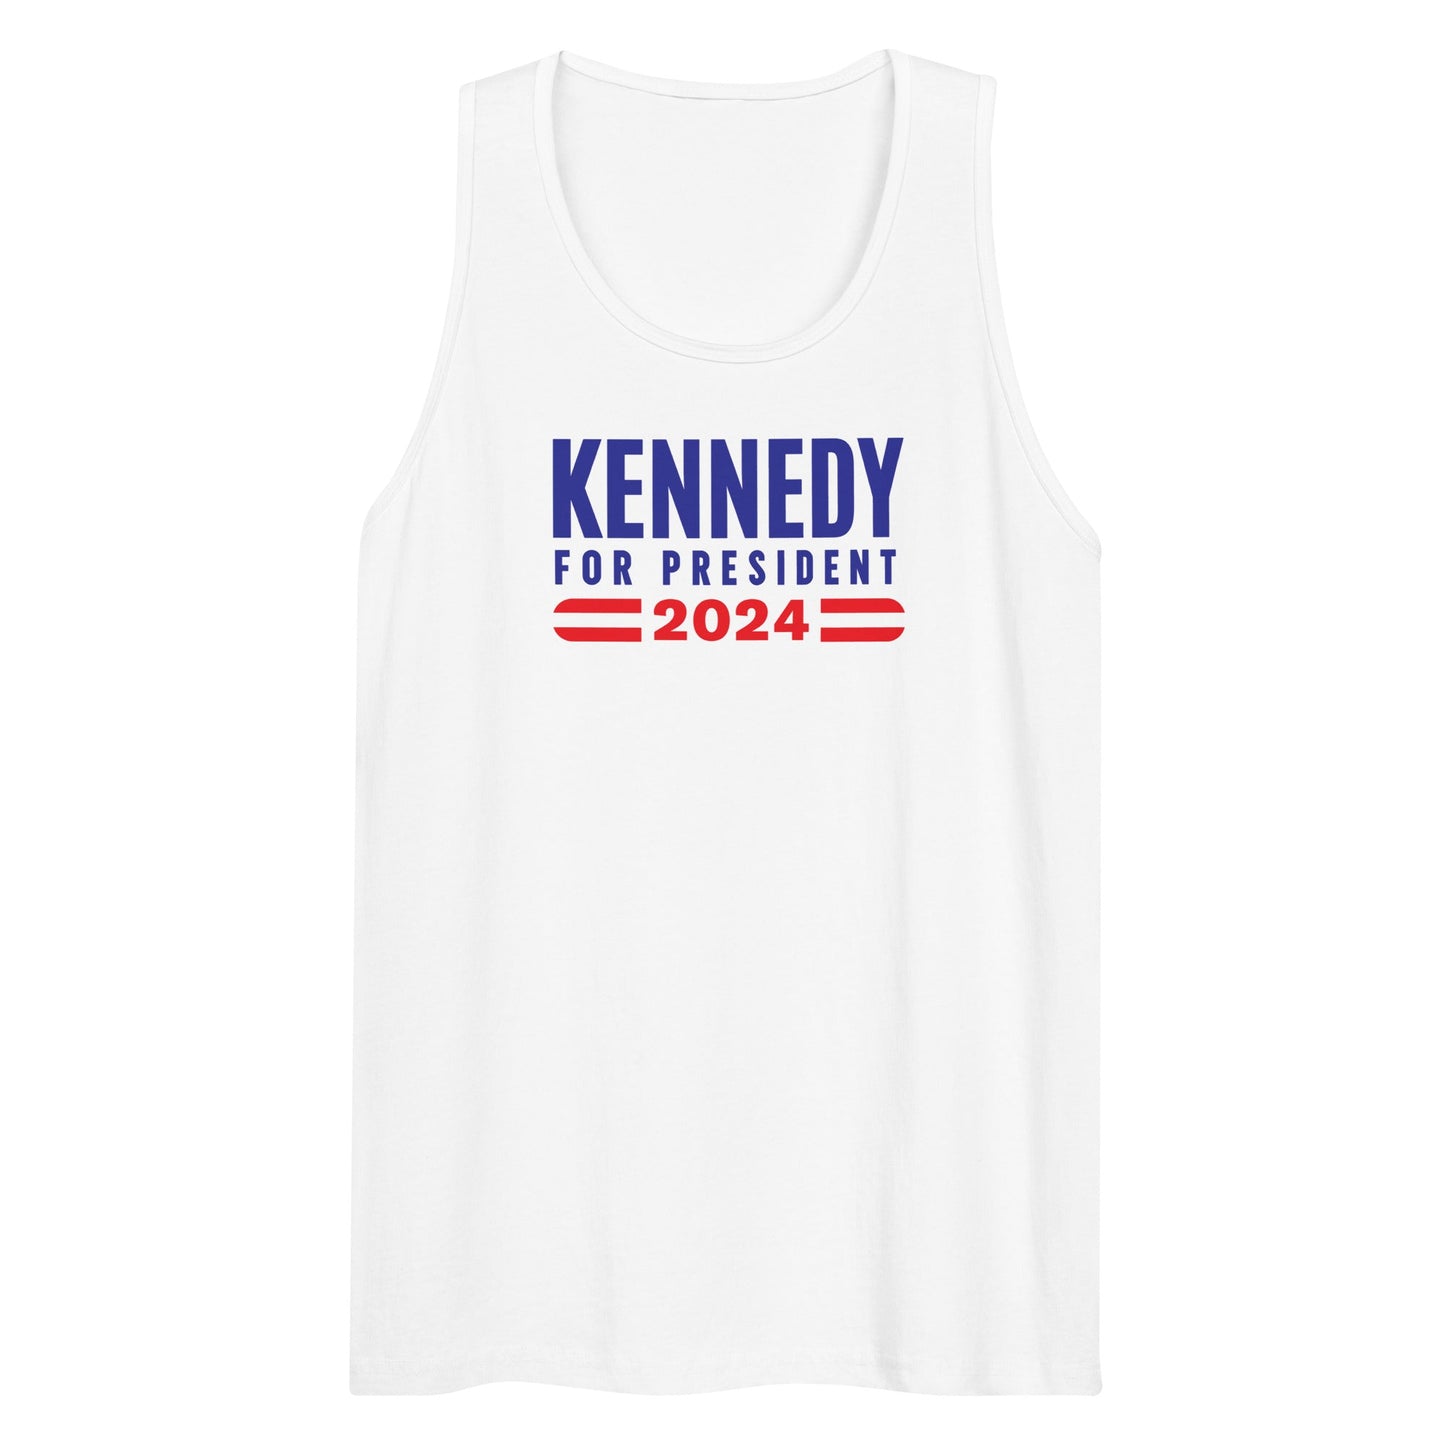 Kennedy for President 2024 Men’s Tank Top - TEAM KENNEDY. All rights reserved